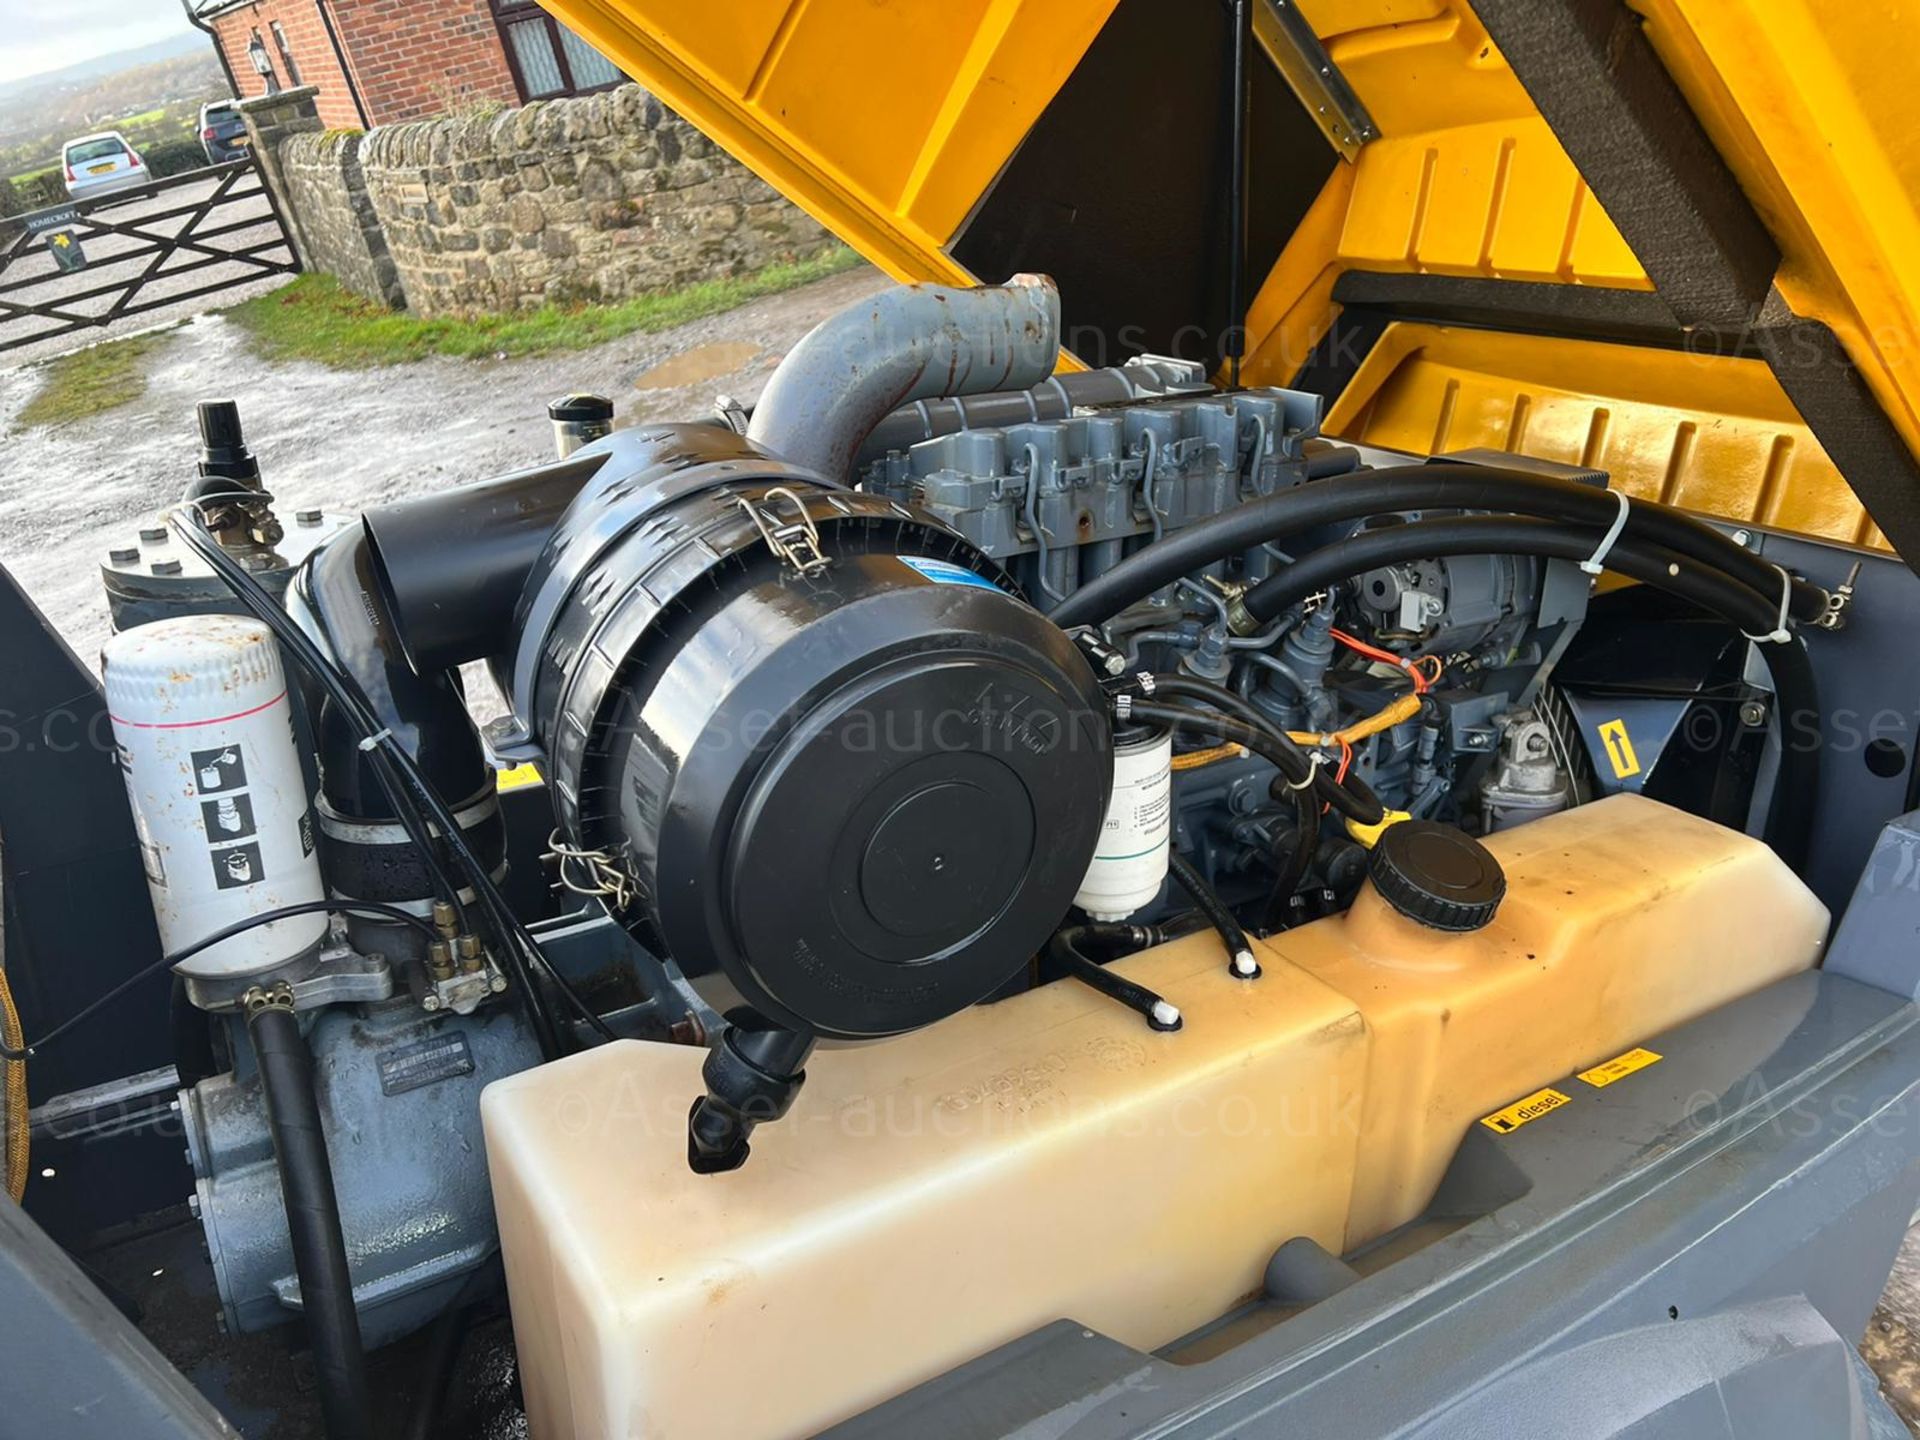 2008 ATLAS COPCO XAS77 DD PE SINGLE AXLE COMPRESSOR, RUNS AND MAKES AIR, SHOWING A LOW 730 HOURS - Image 9 of 15